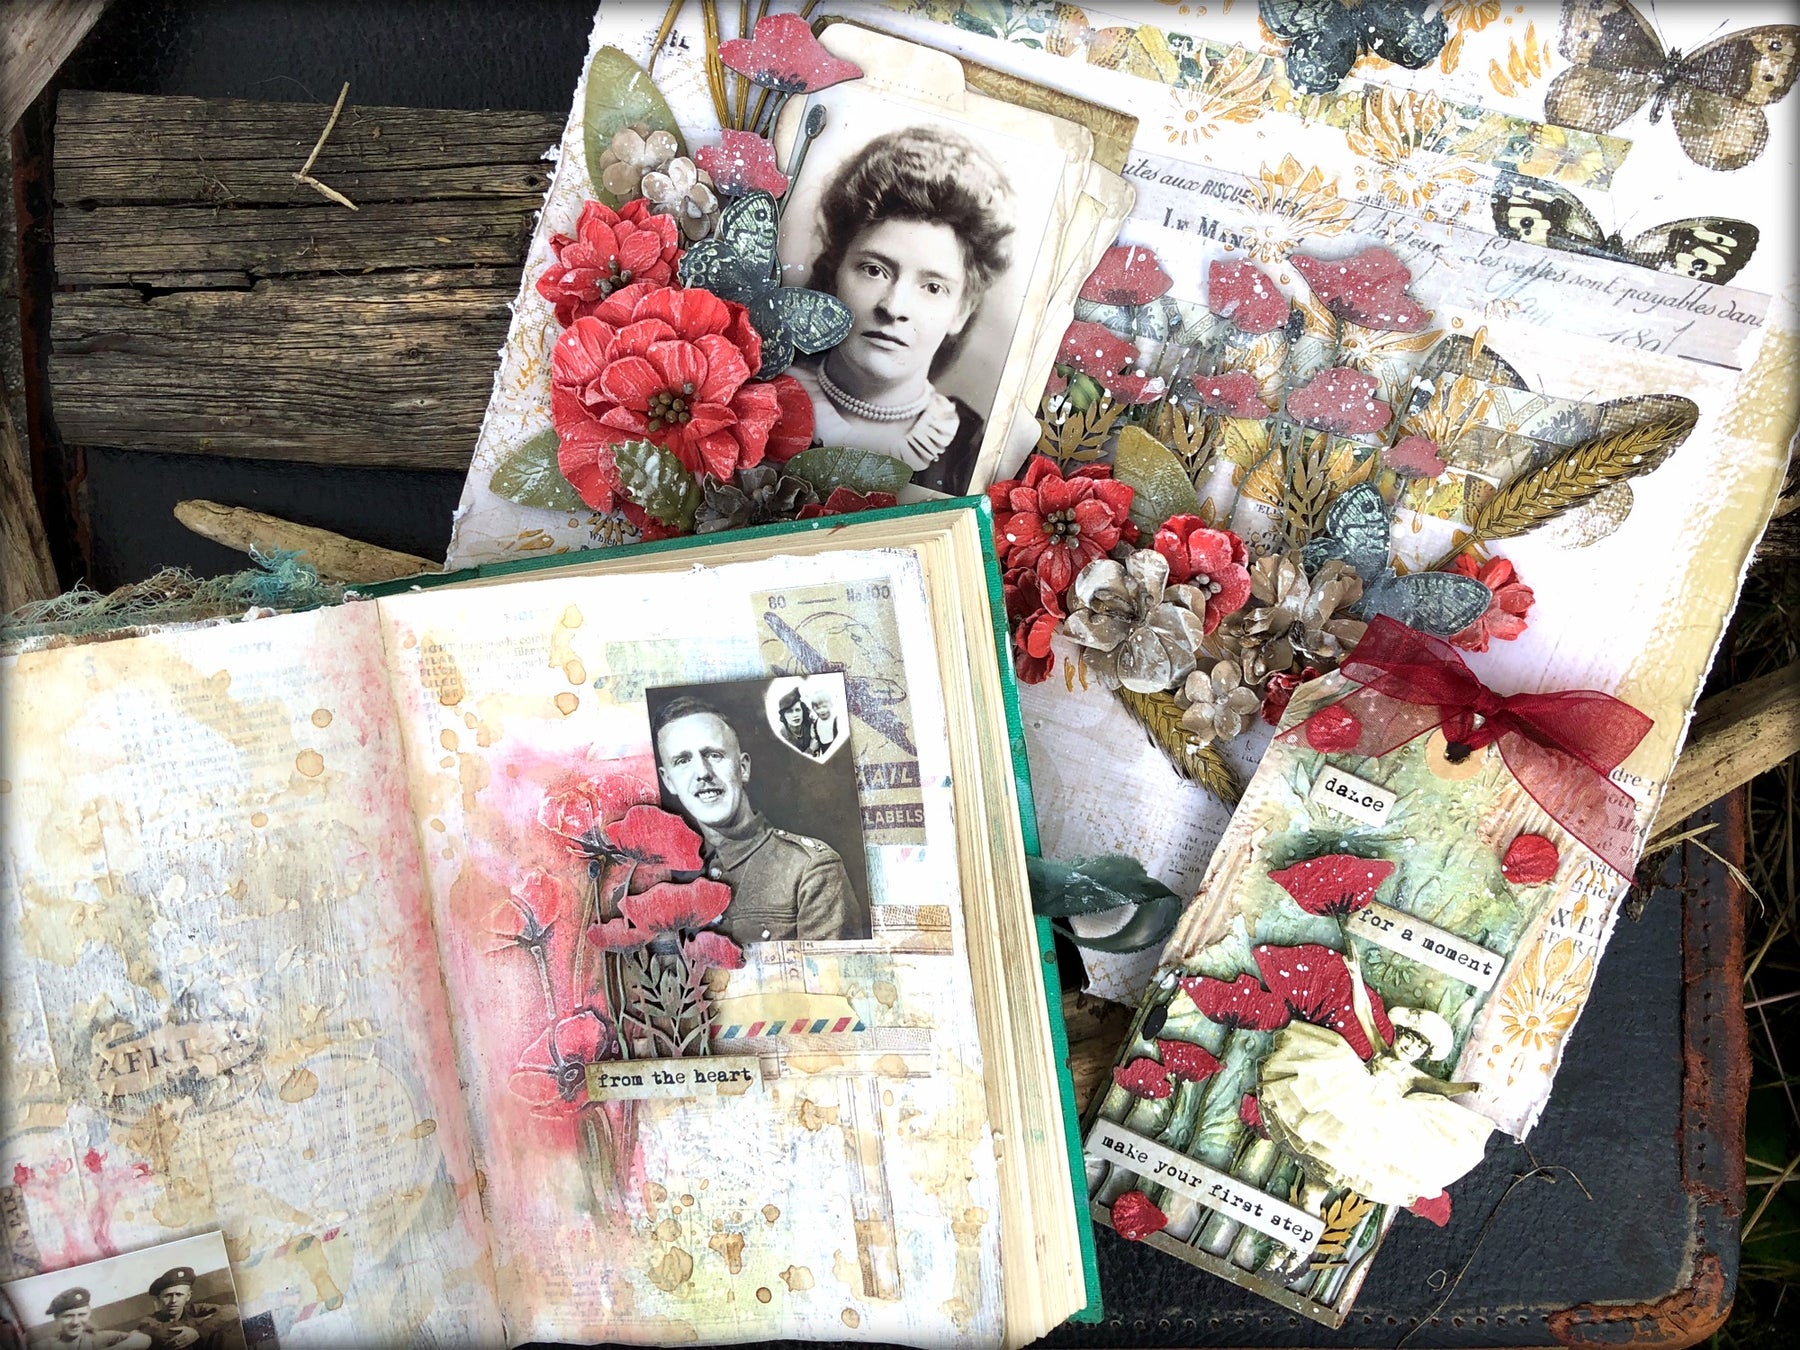 Product focus - Dusty Attic Chipboard - (Poppies) by Louise Crosbie